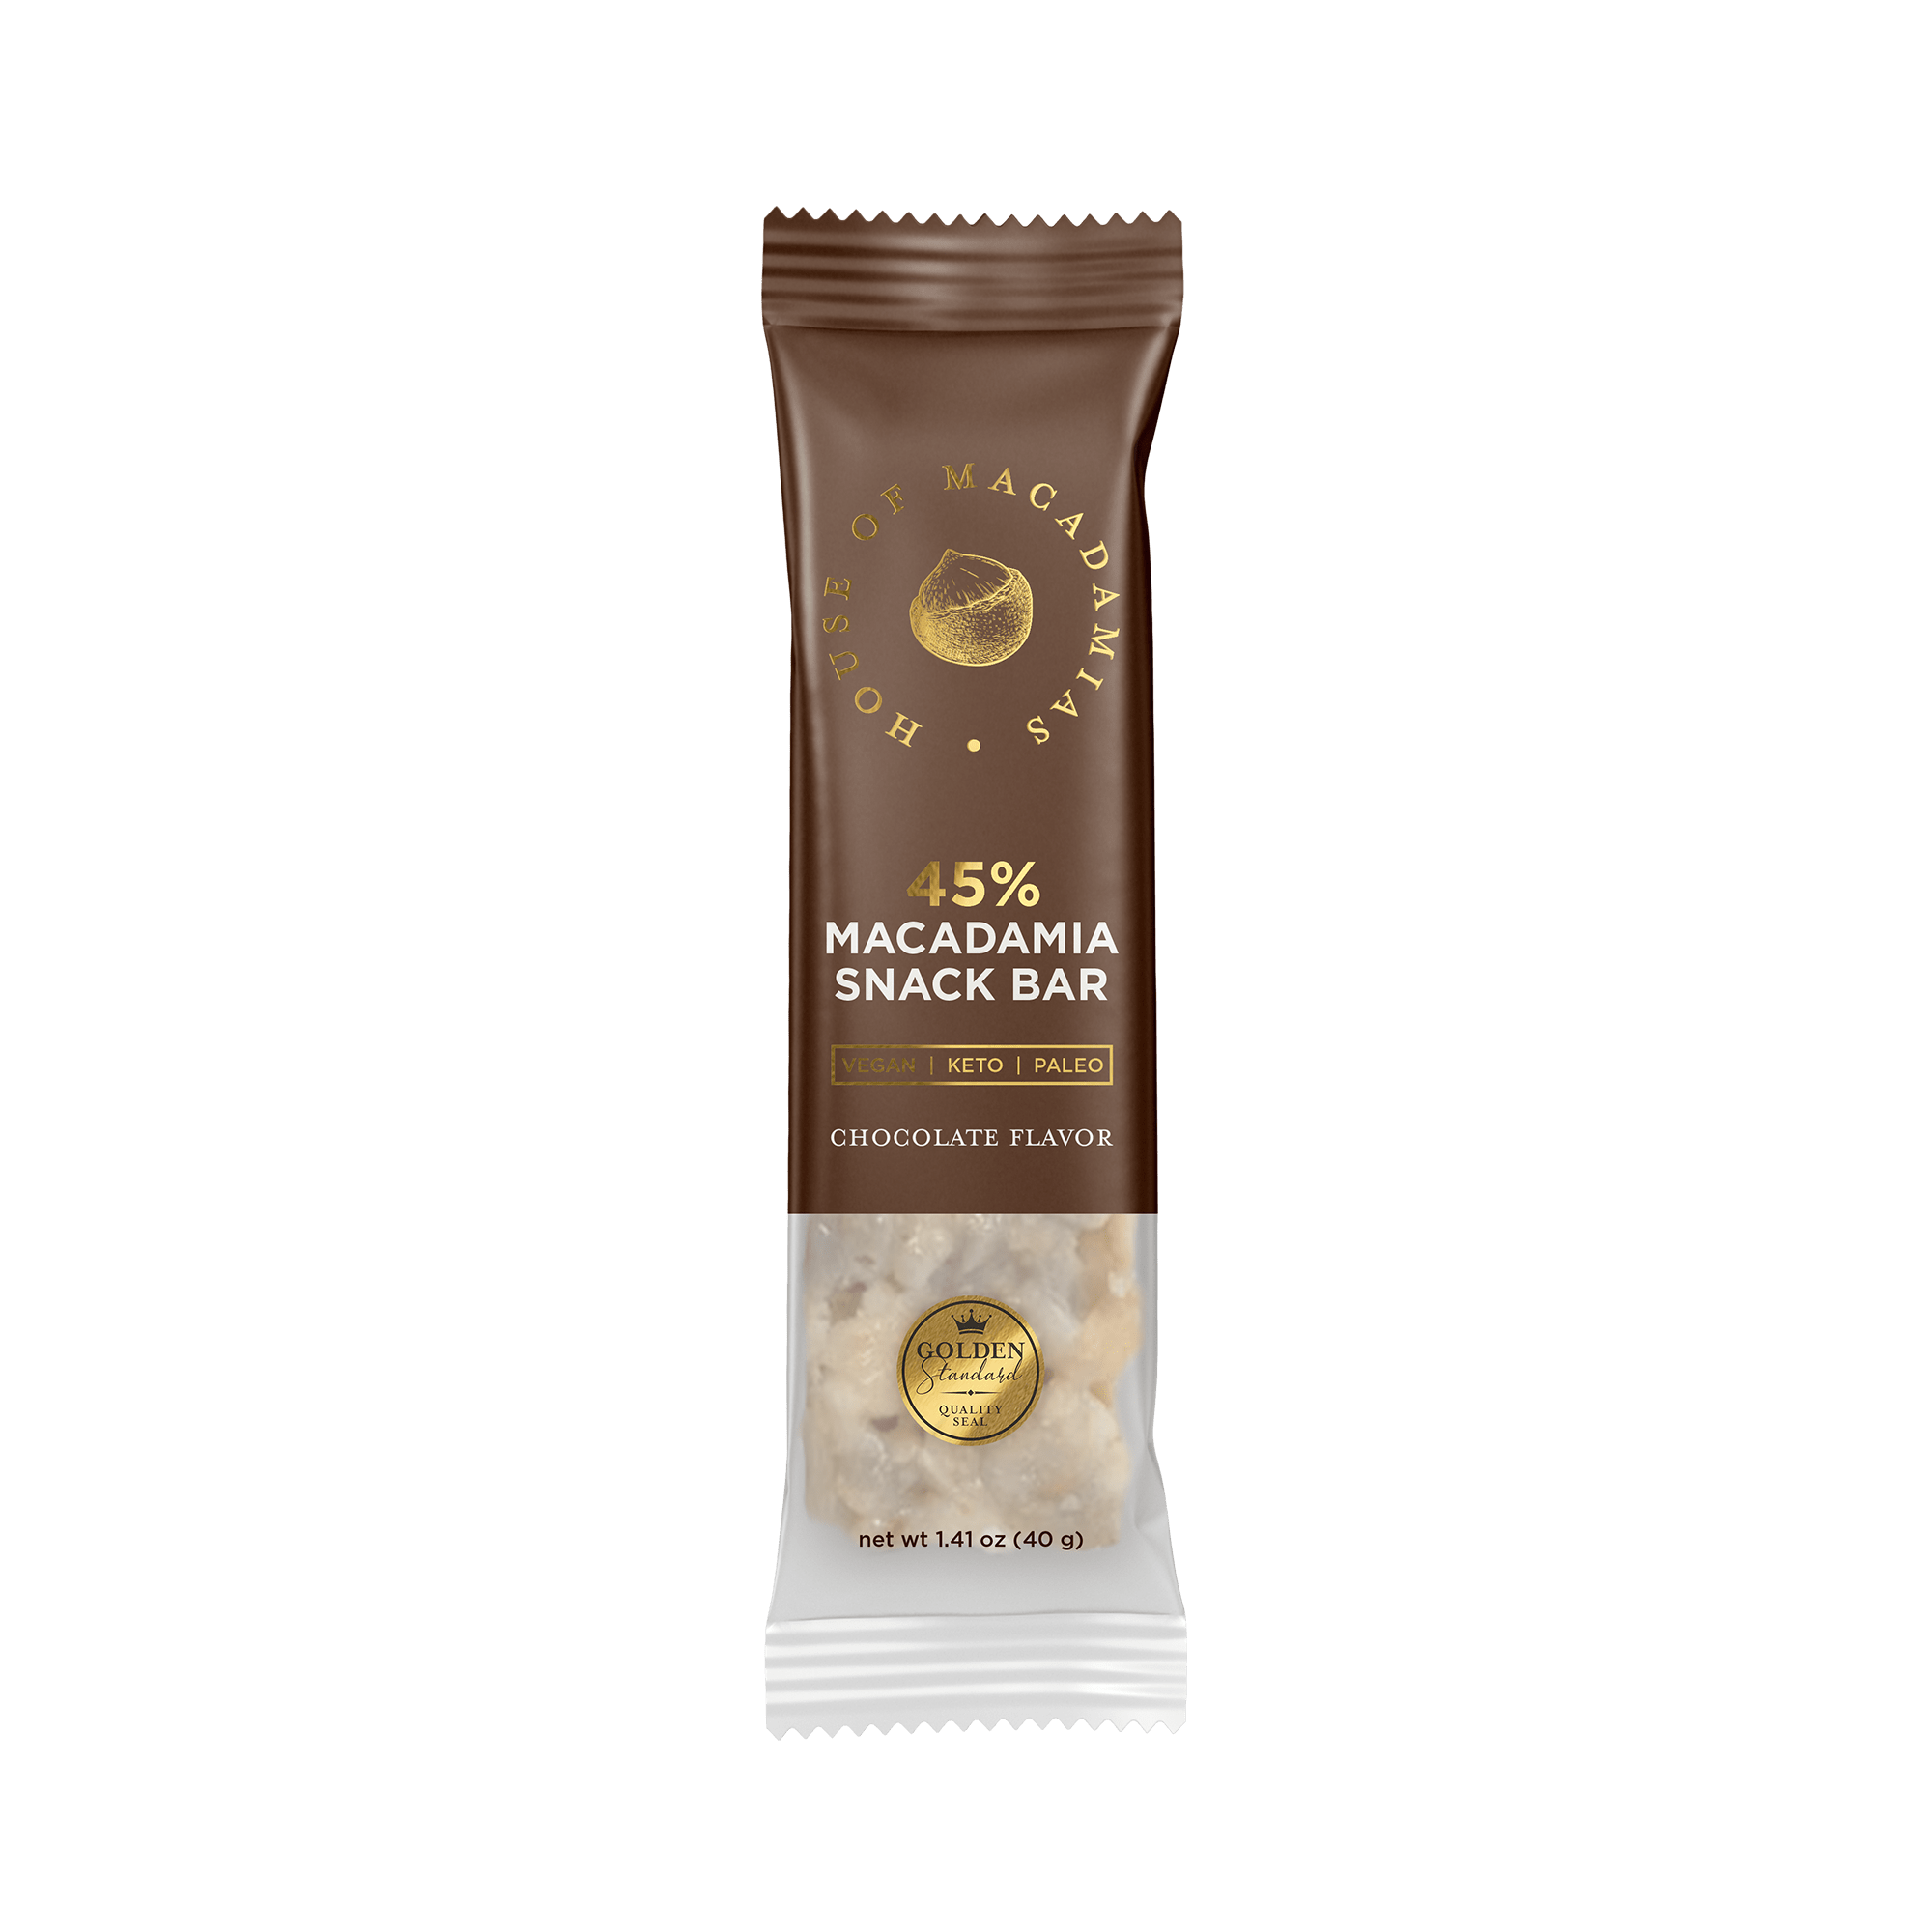 Macadamia Snack Bar Variety Pack (4 Flavors, 12 Bars) - House of Macadamias -  almonds for weight loss